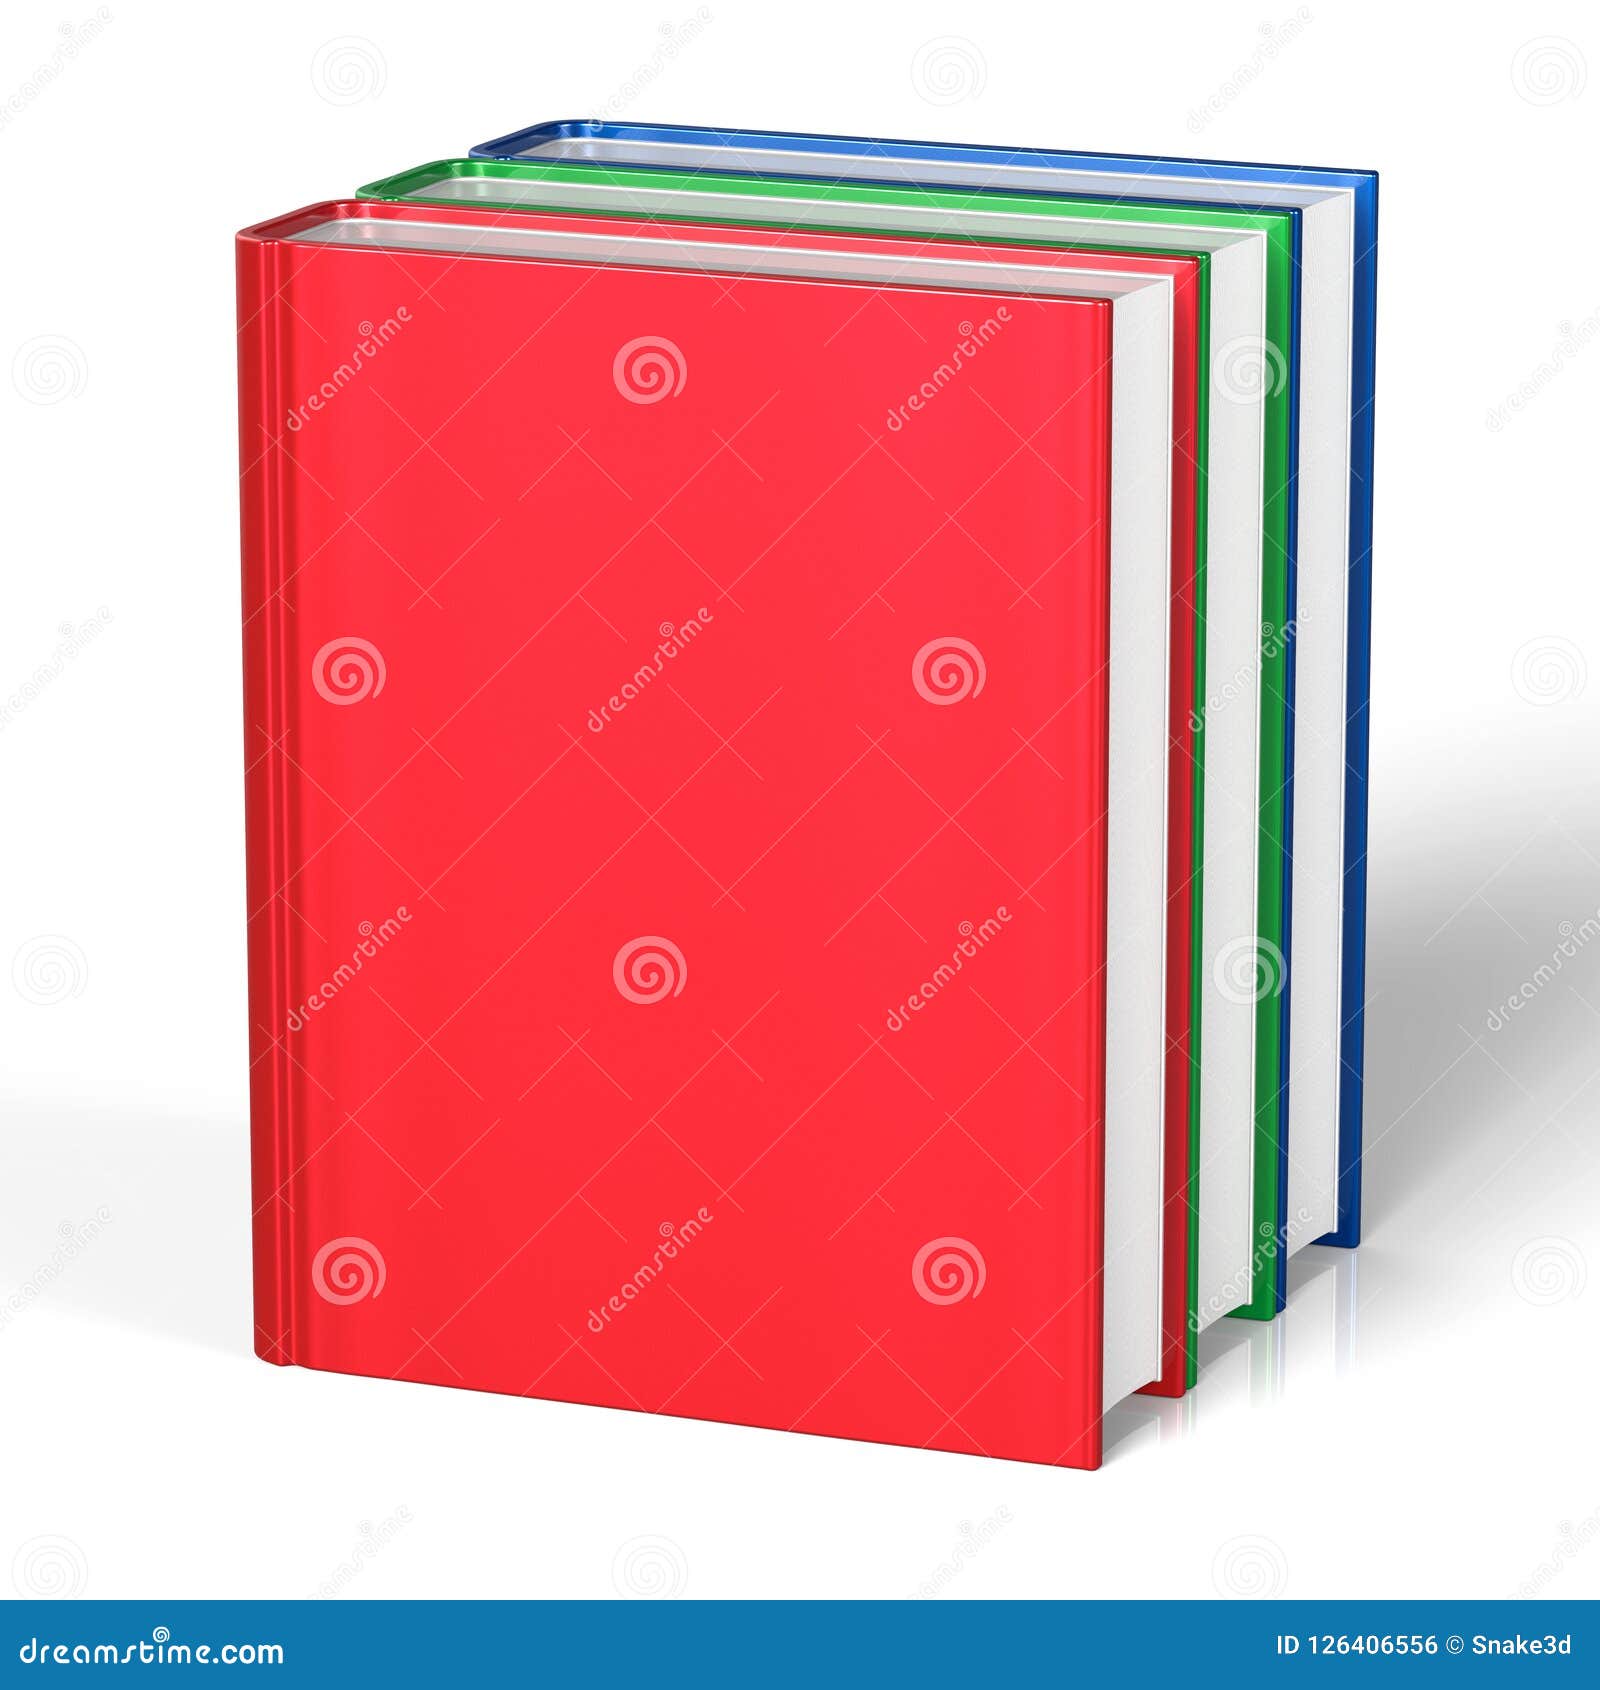 Blank Books Three Red Green Blue Cover Standing Empty Stock ...